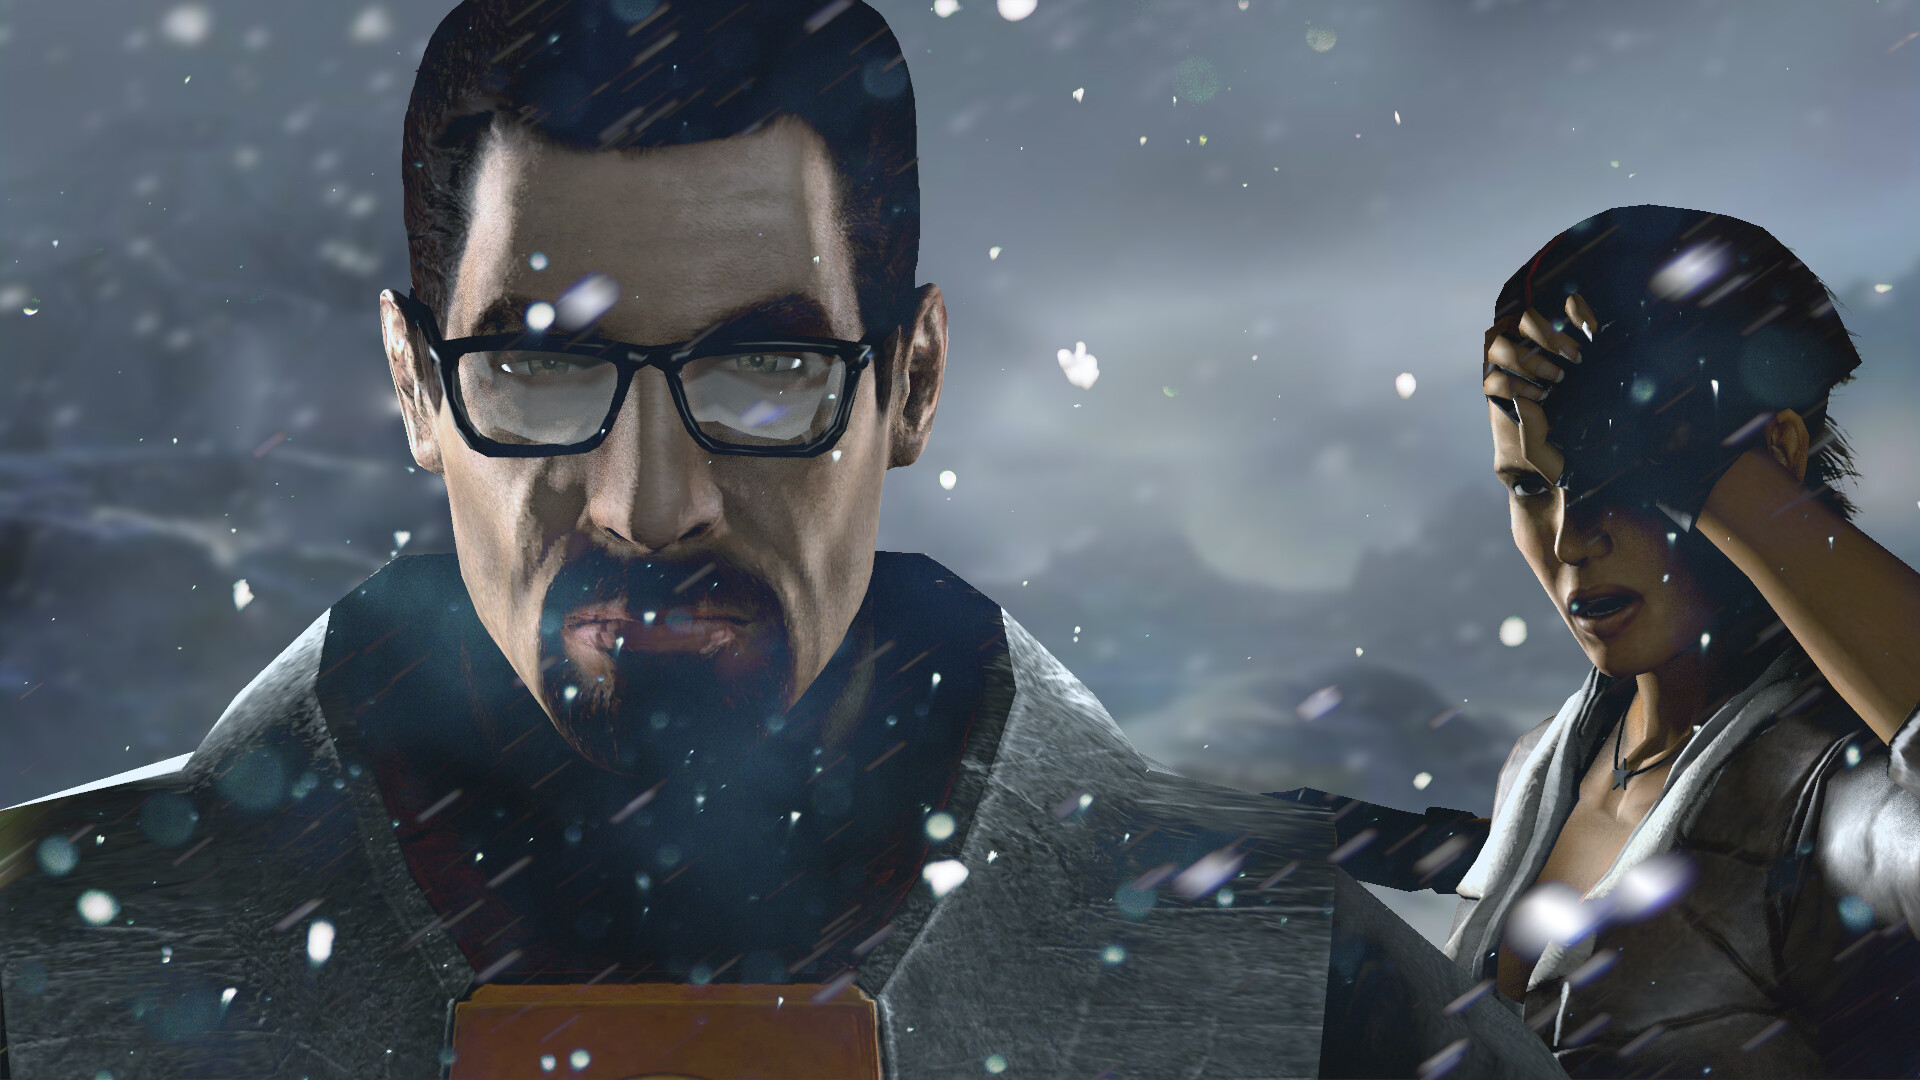 Half-Life 2: Shooter, Game developed and published by Valve. 1920x1080 Full HD Wallpaper.